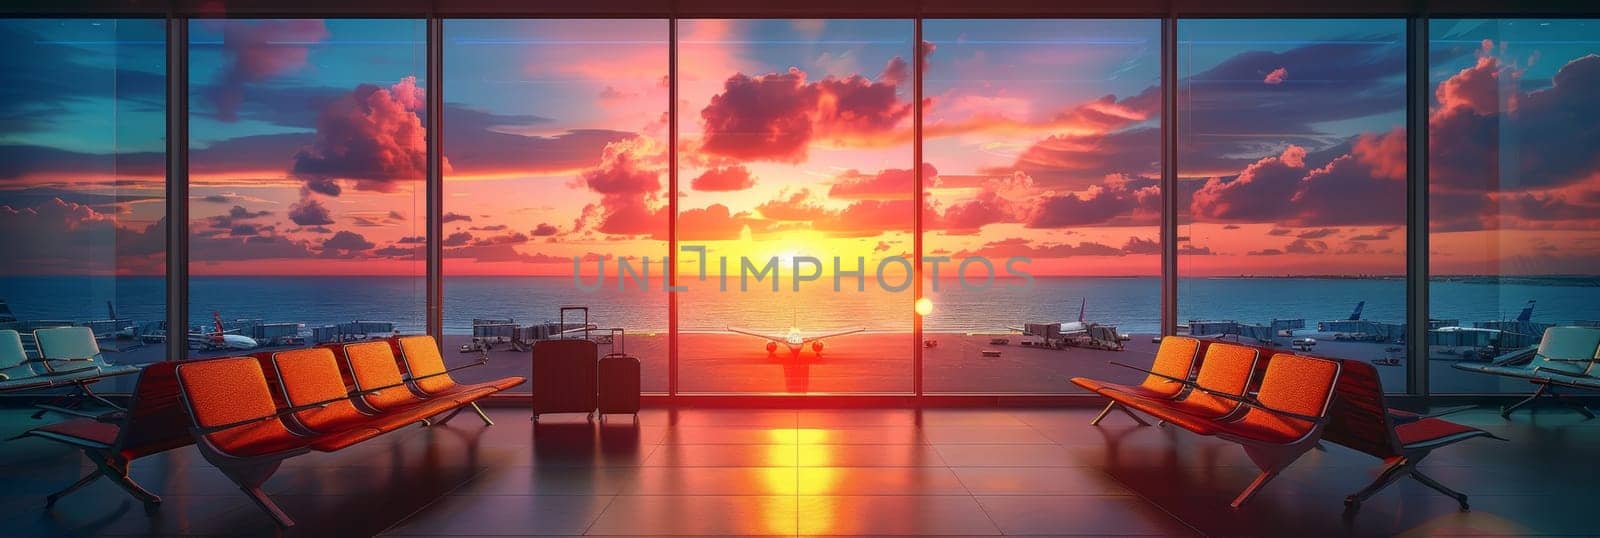 A stunning sunset casts a warm, vibrant glow over the airport lounge, creating a serene and tranquil atmosphere for travelers awaiting their flights